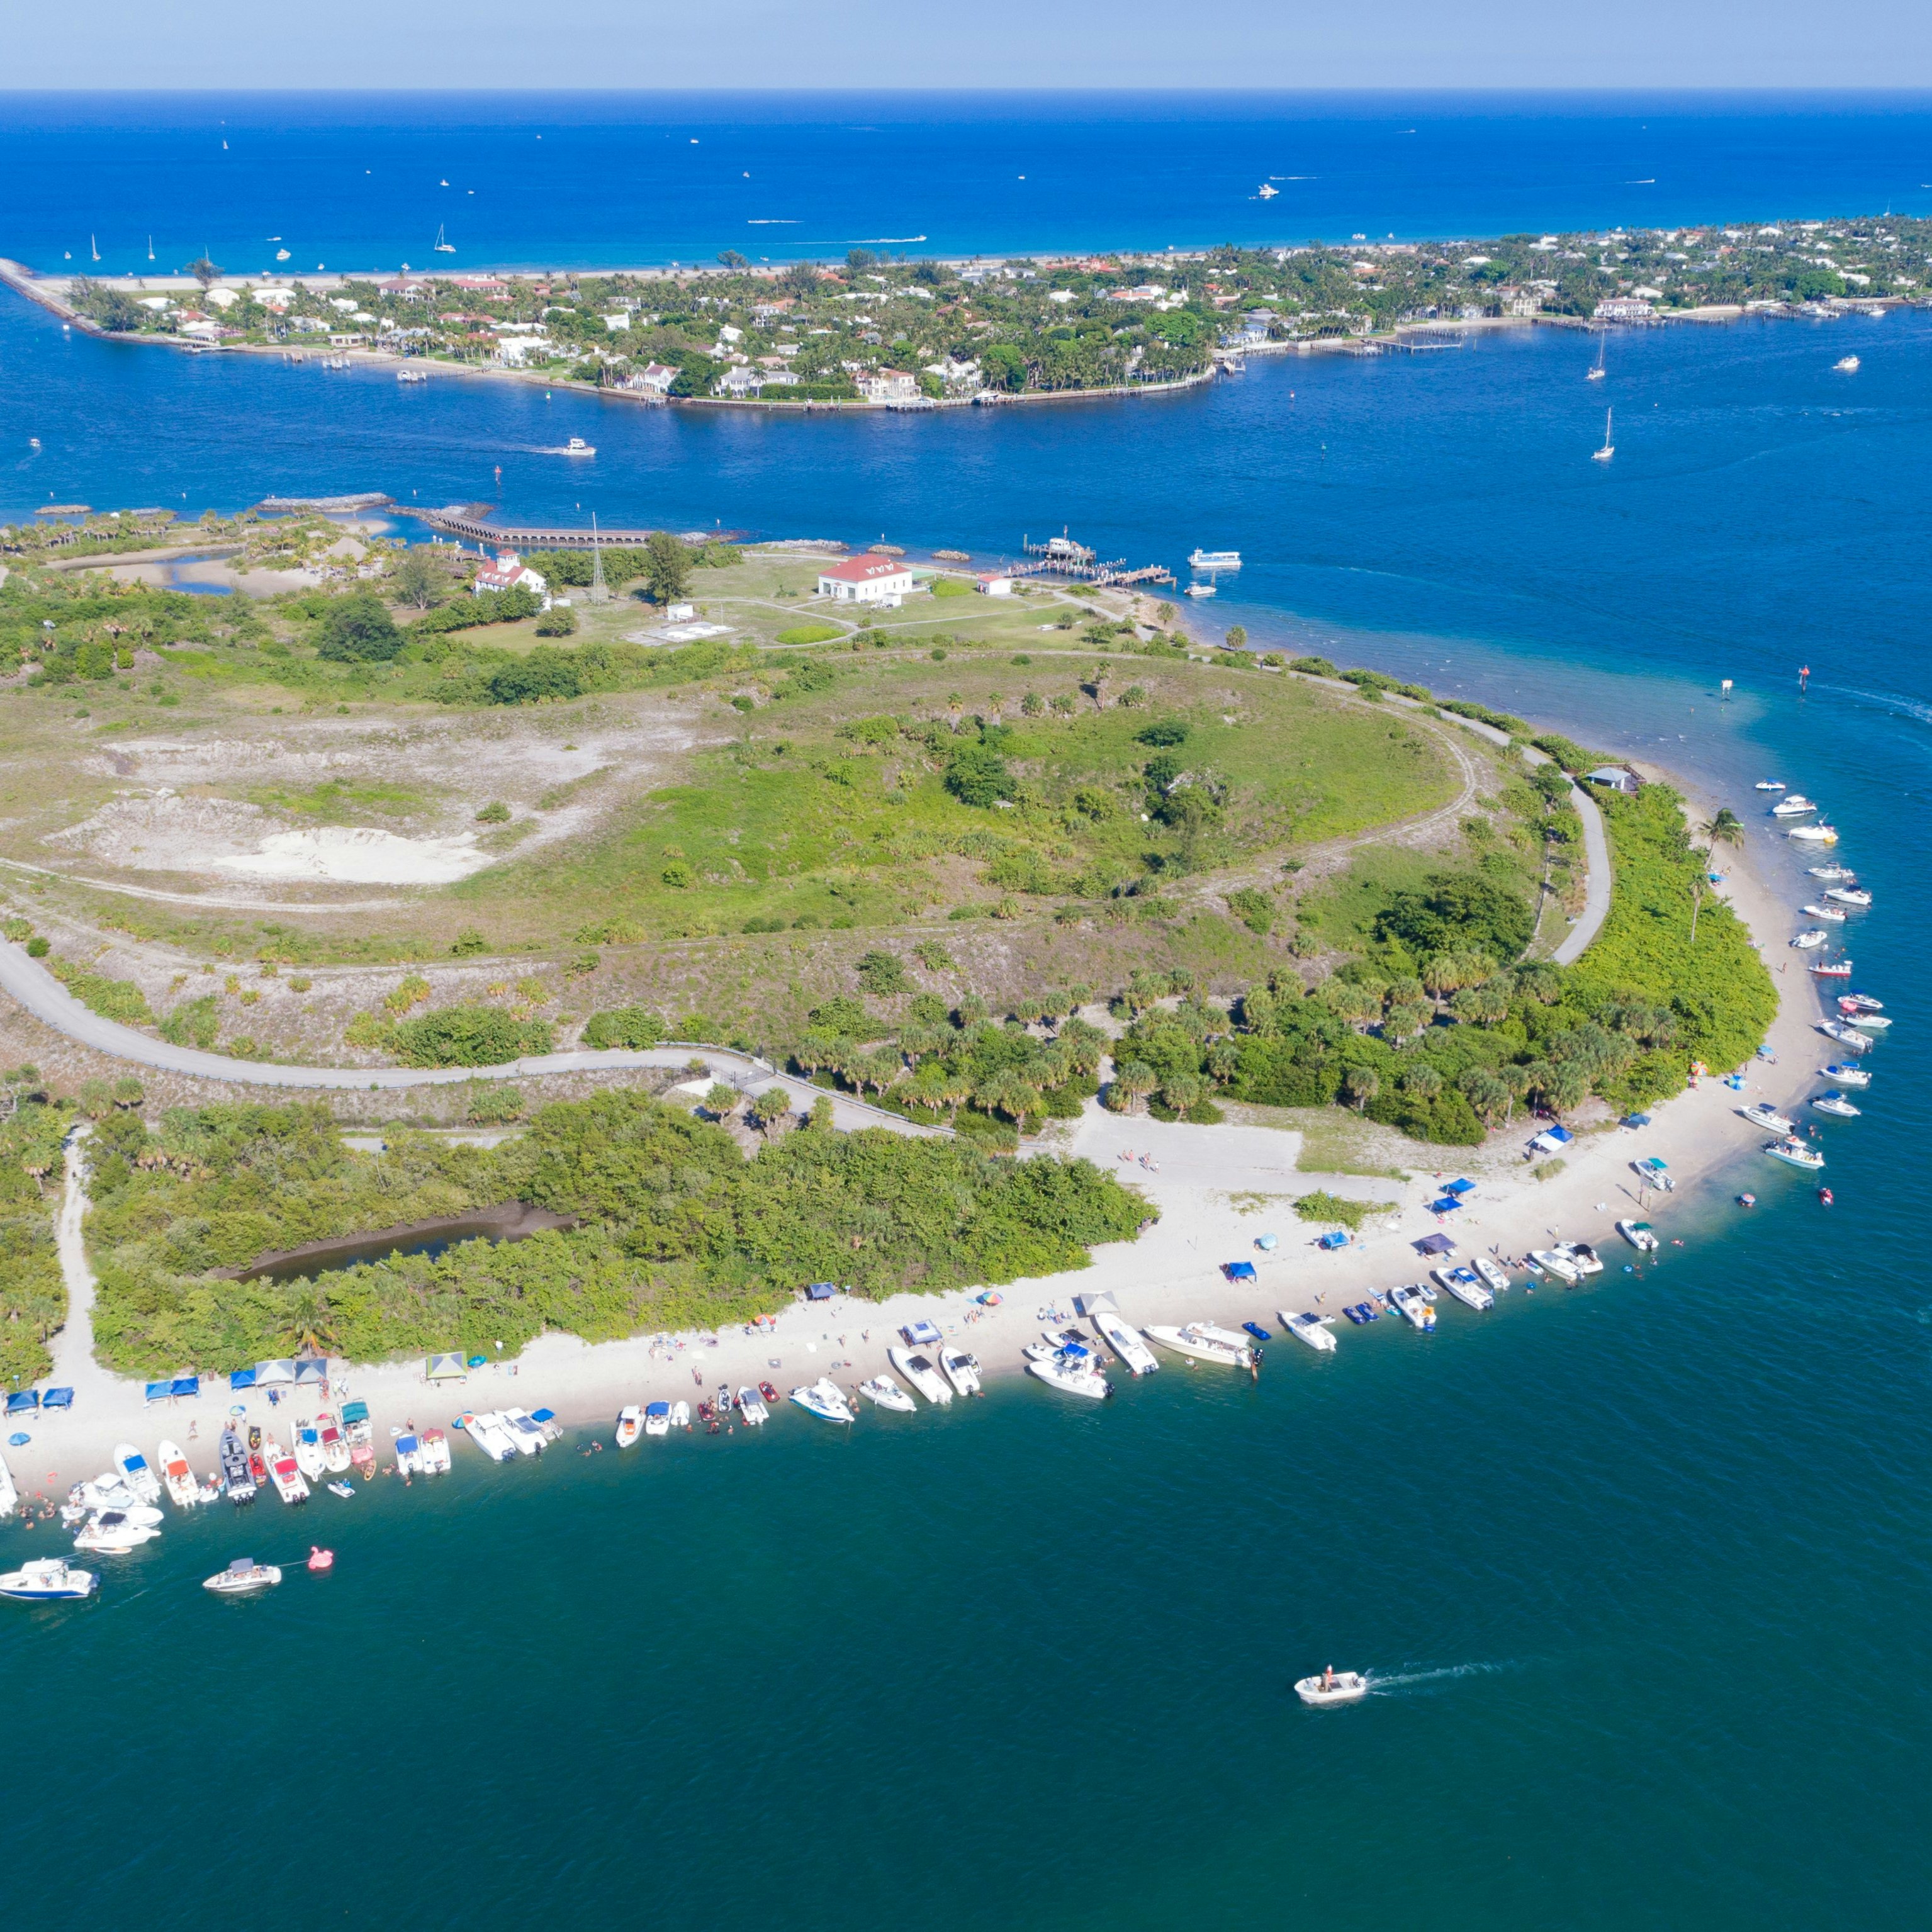 Aerial view of Peanut Island in Riviera Beach, Florida on memorial day weekend. Clear skies and blue water with plenty of boaters